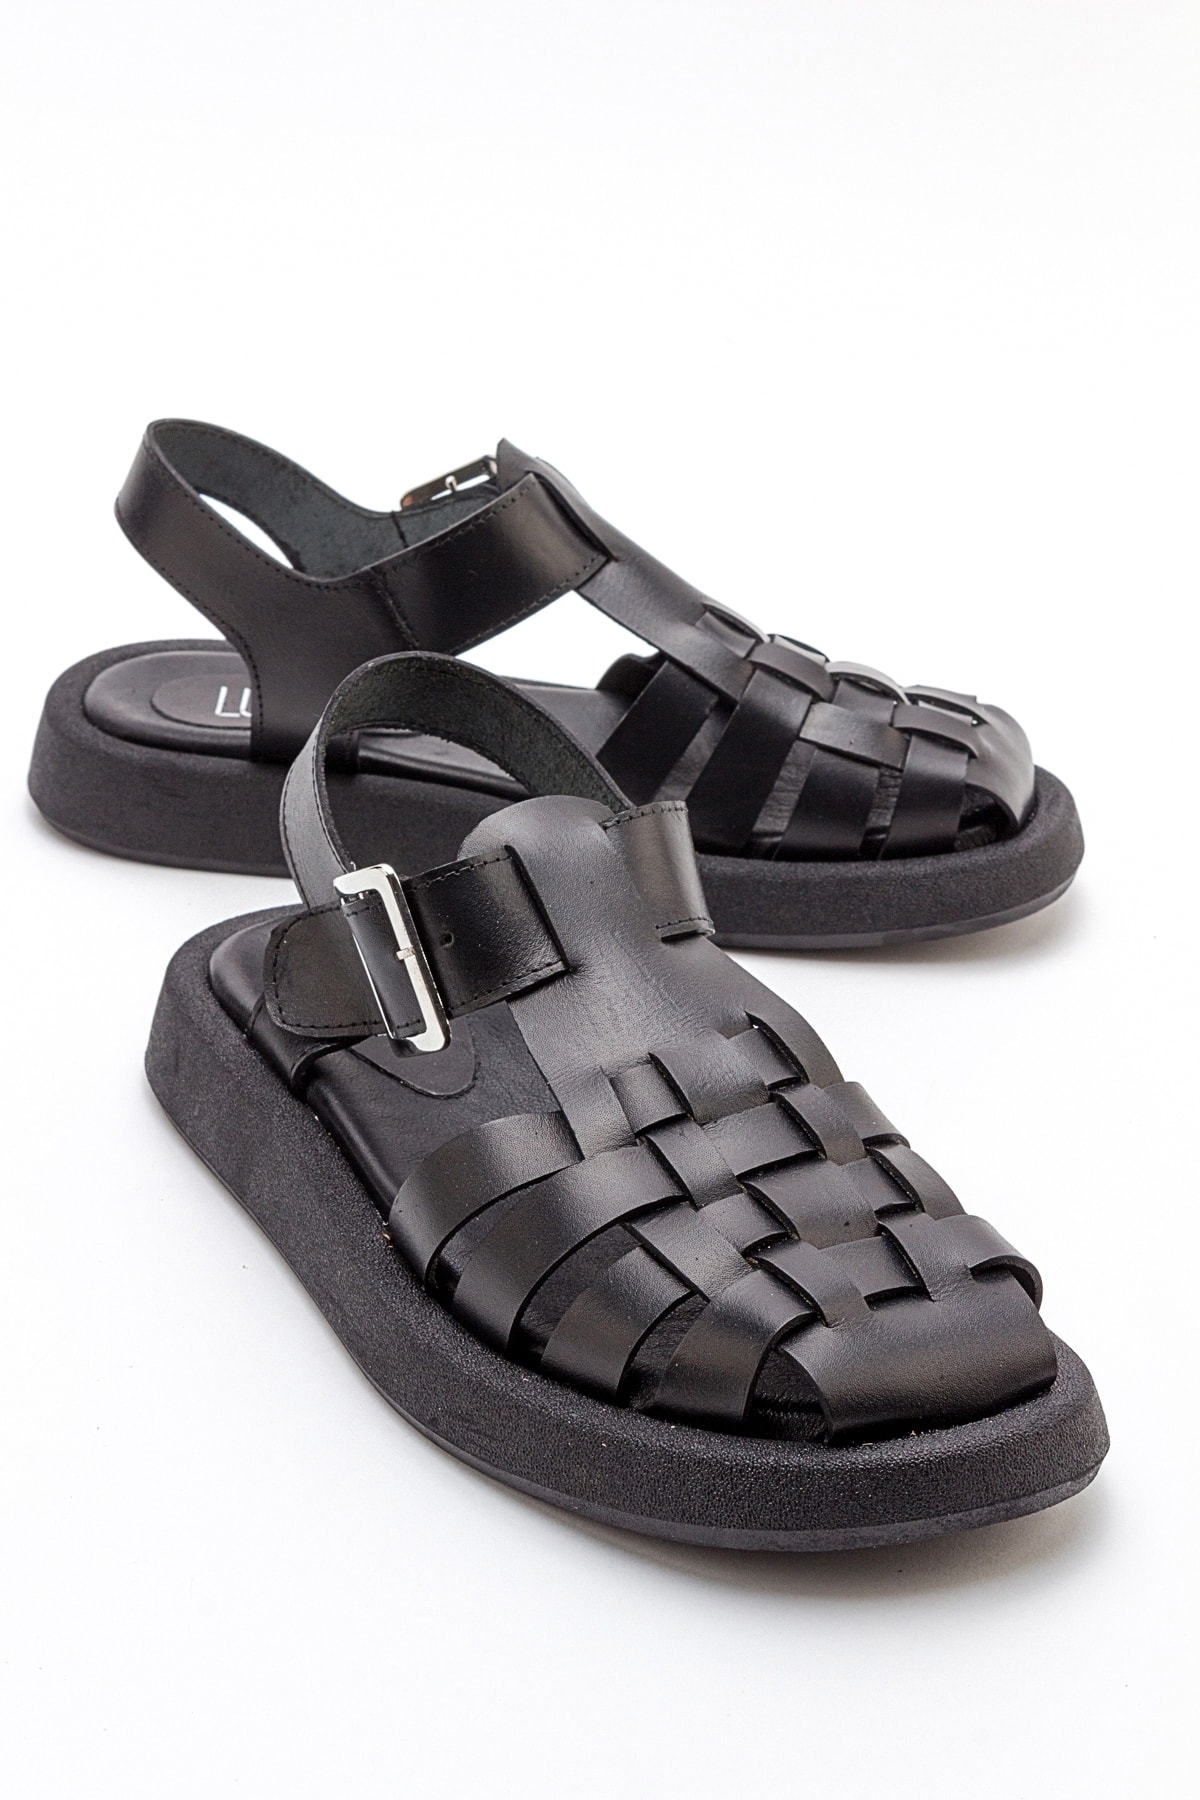 LuviShoes GUST Women's Black Genuine Leather Sandals